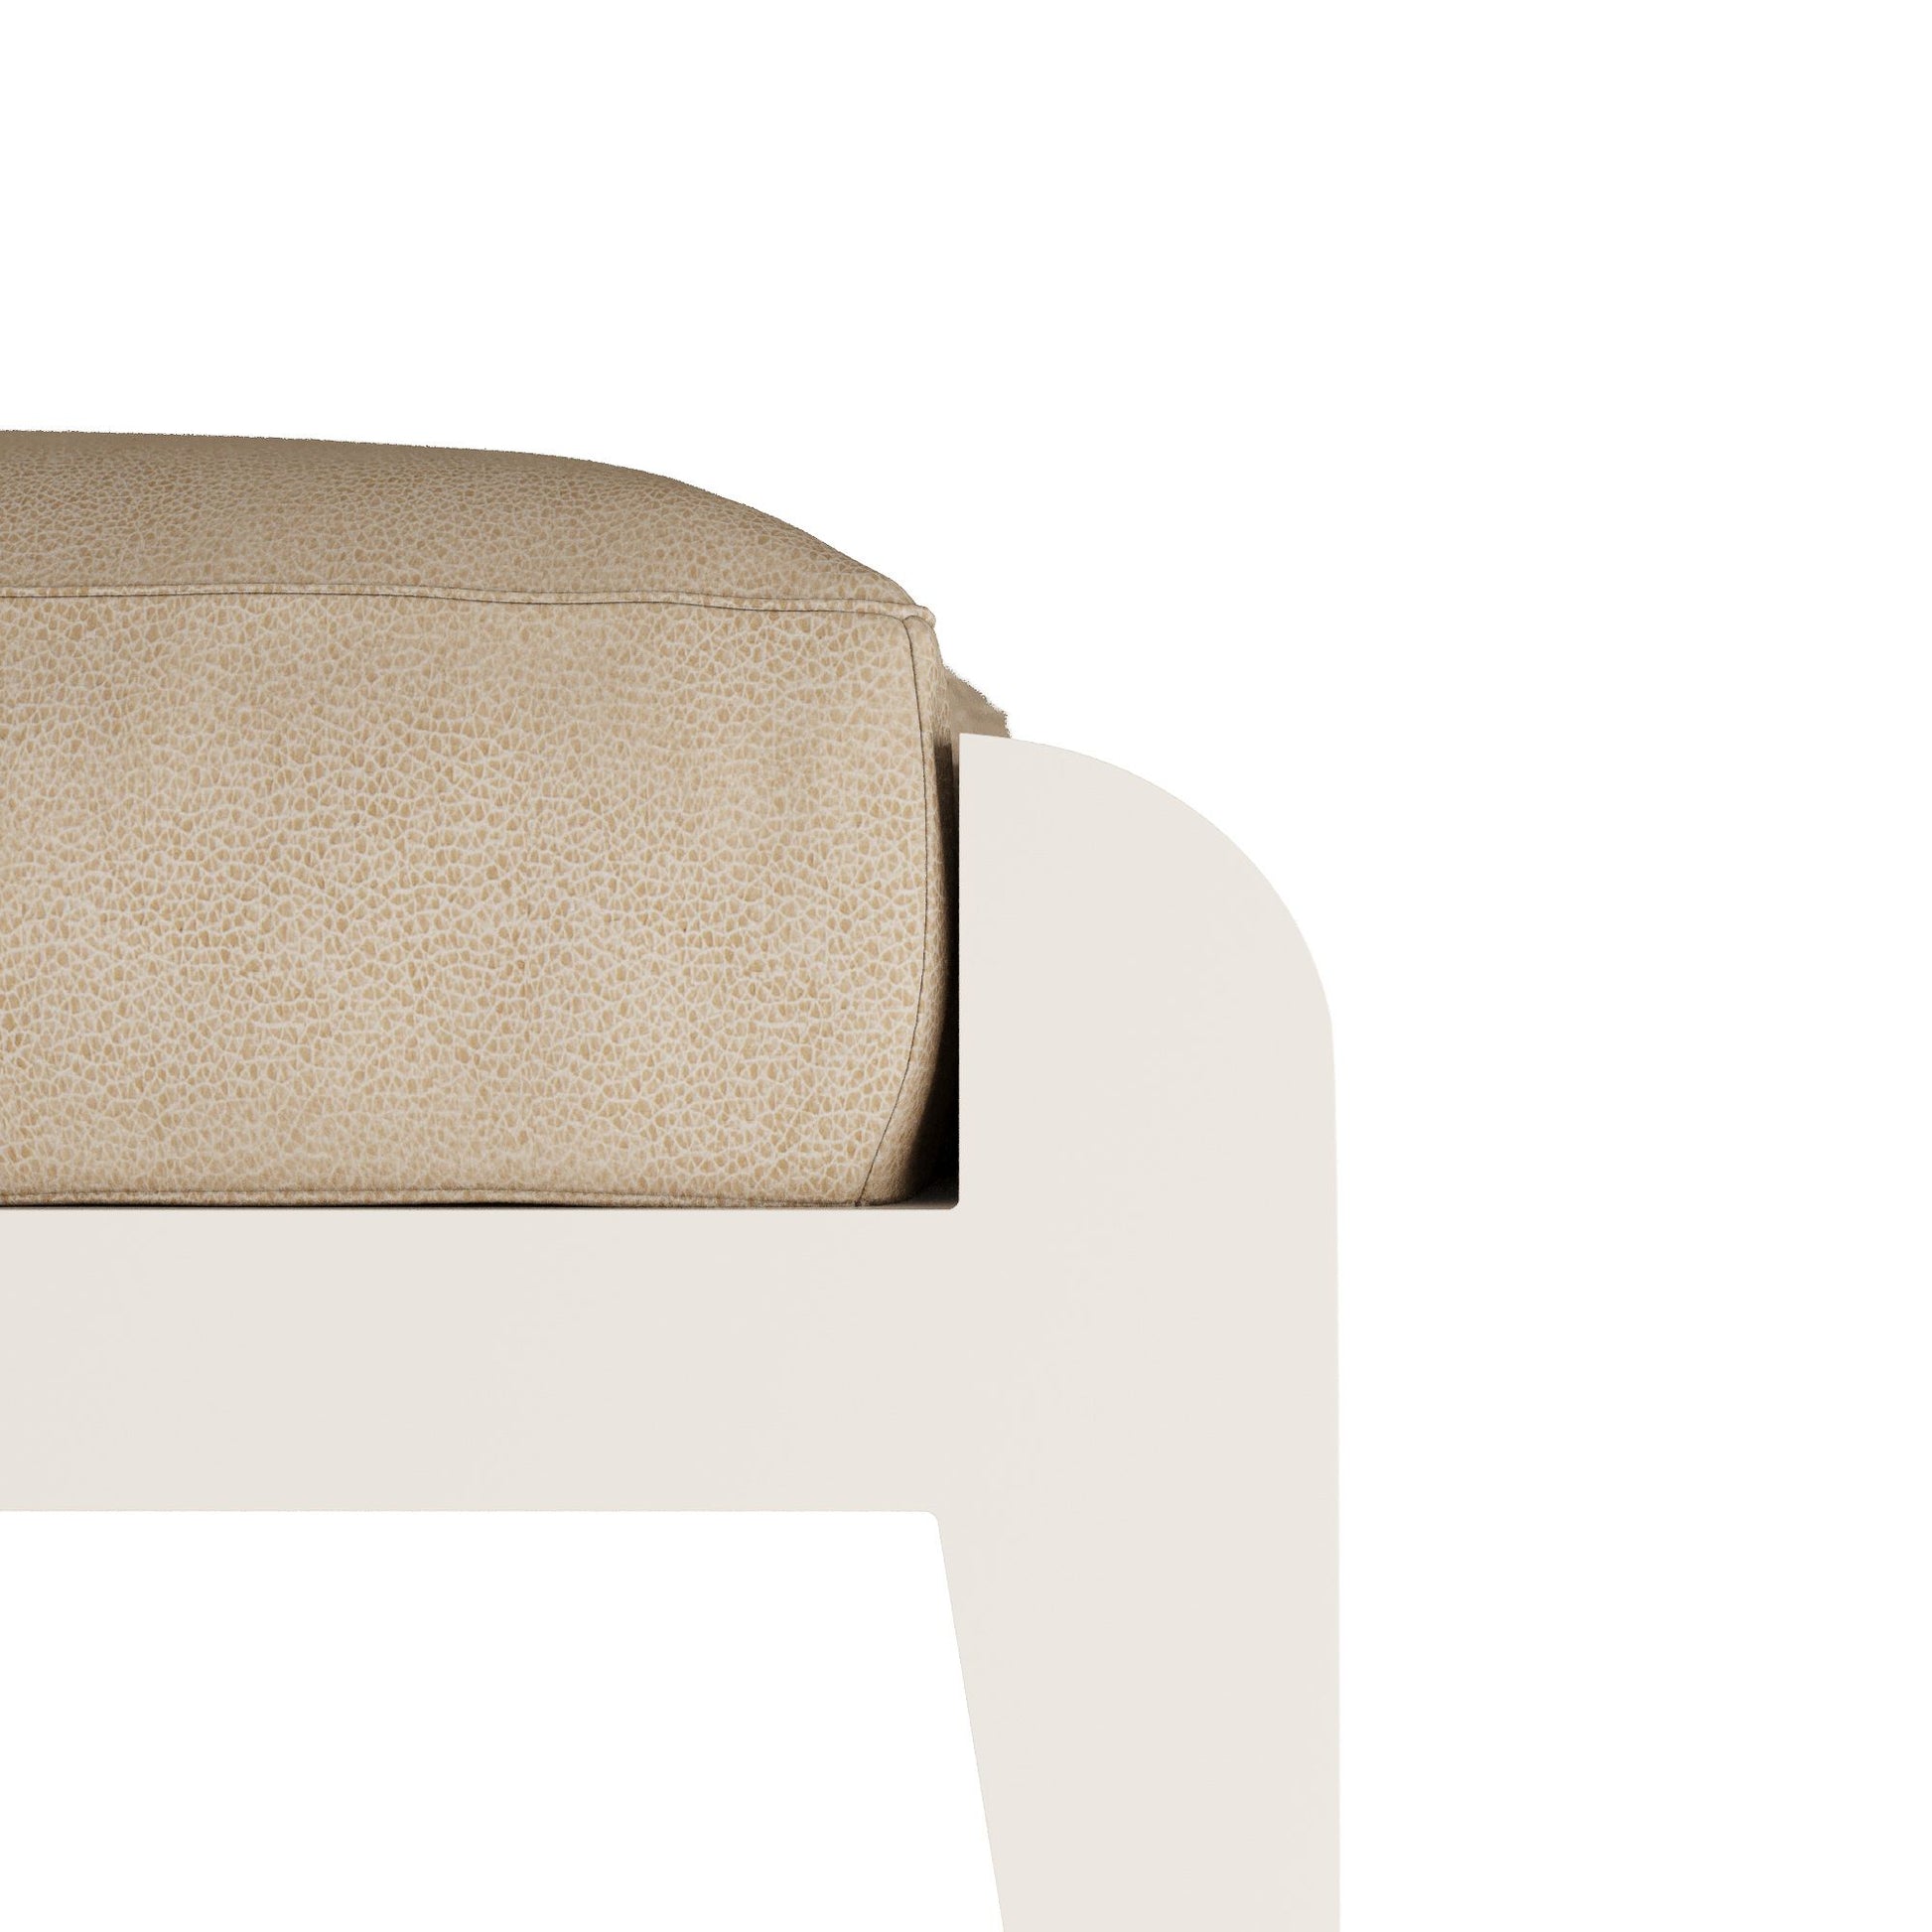 Alanna Ottoman Ivory Lacquer and Sand Leather